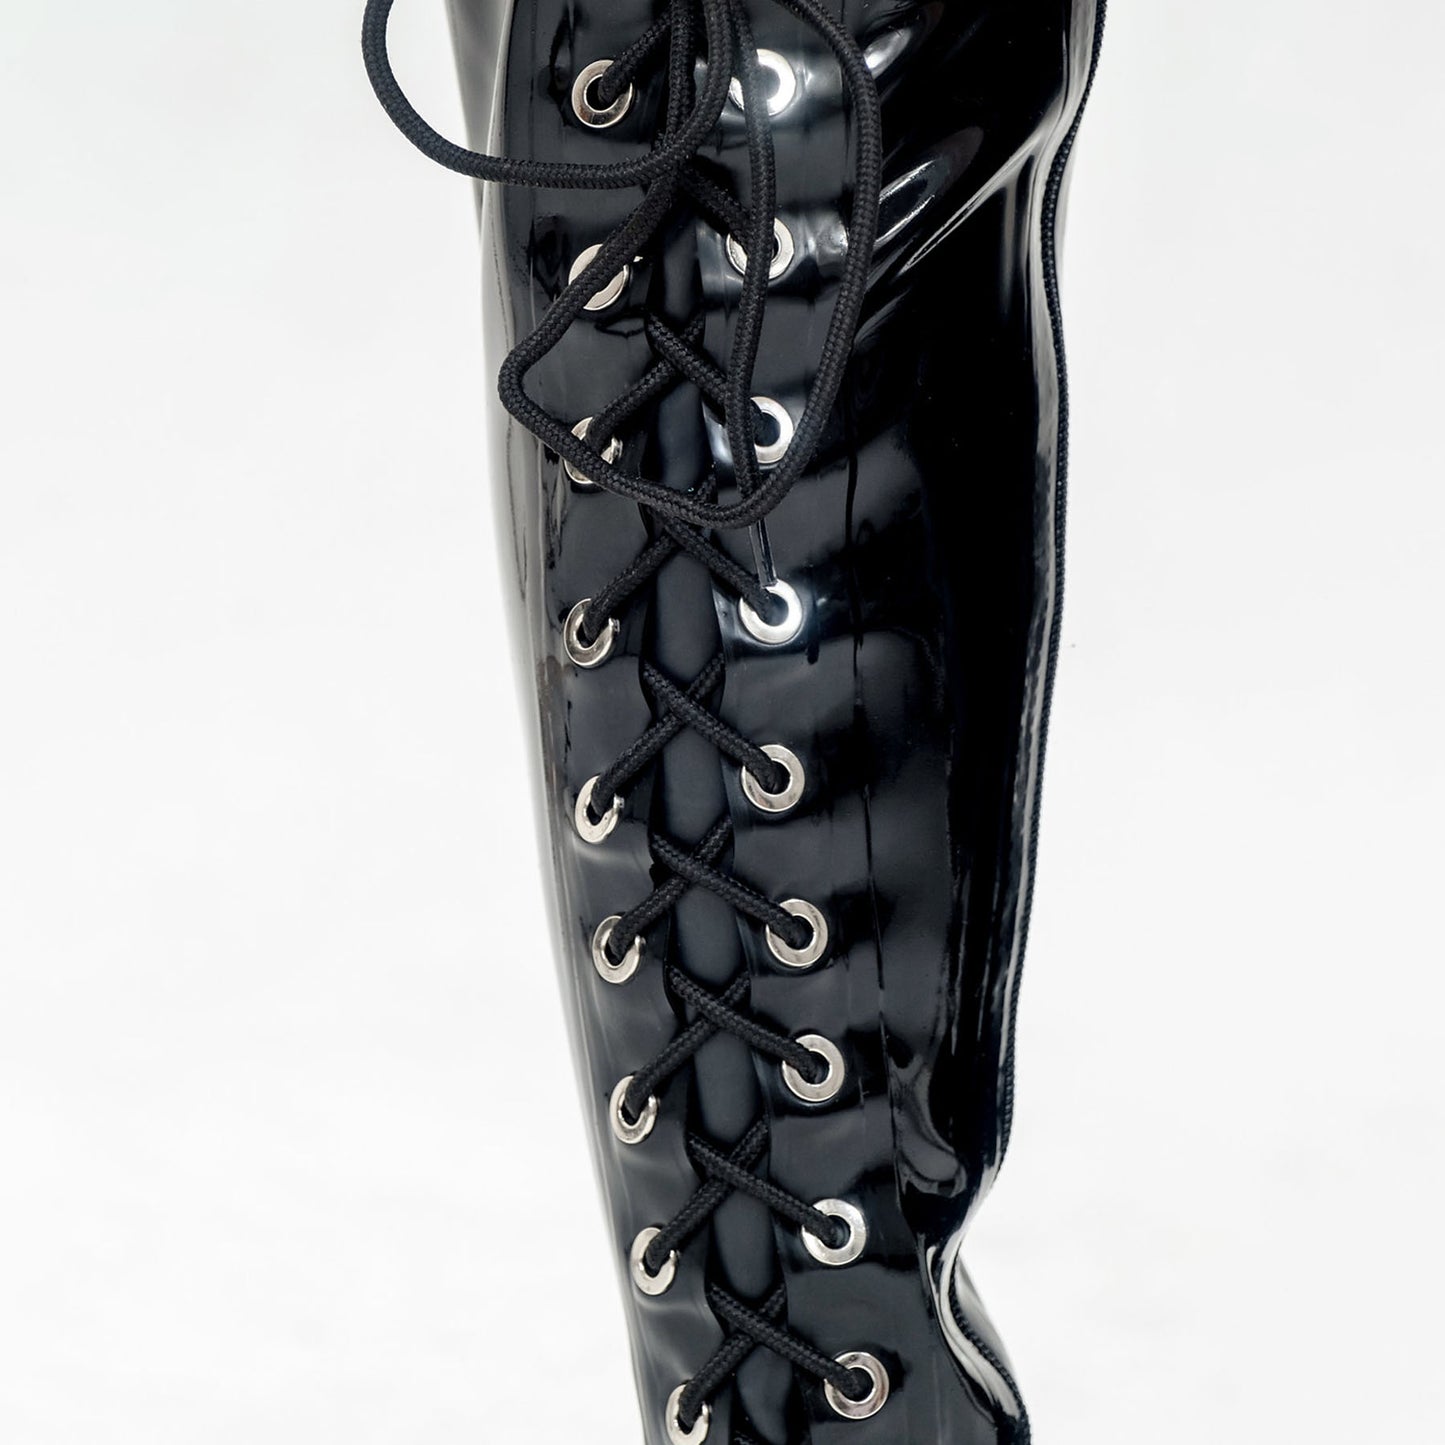 Black Solid Color Latex Lace Up High Heel Knee Boots